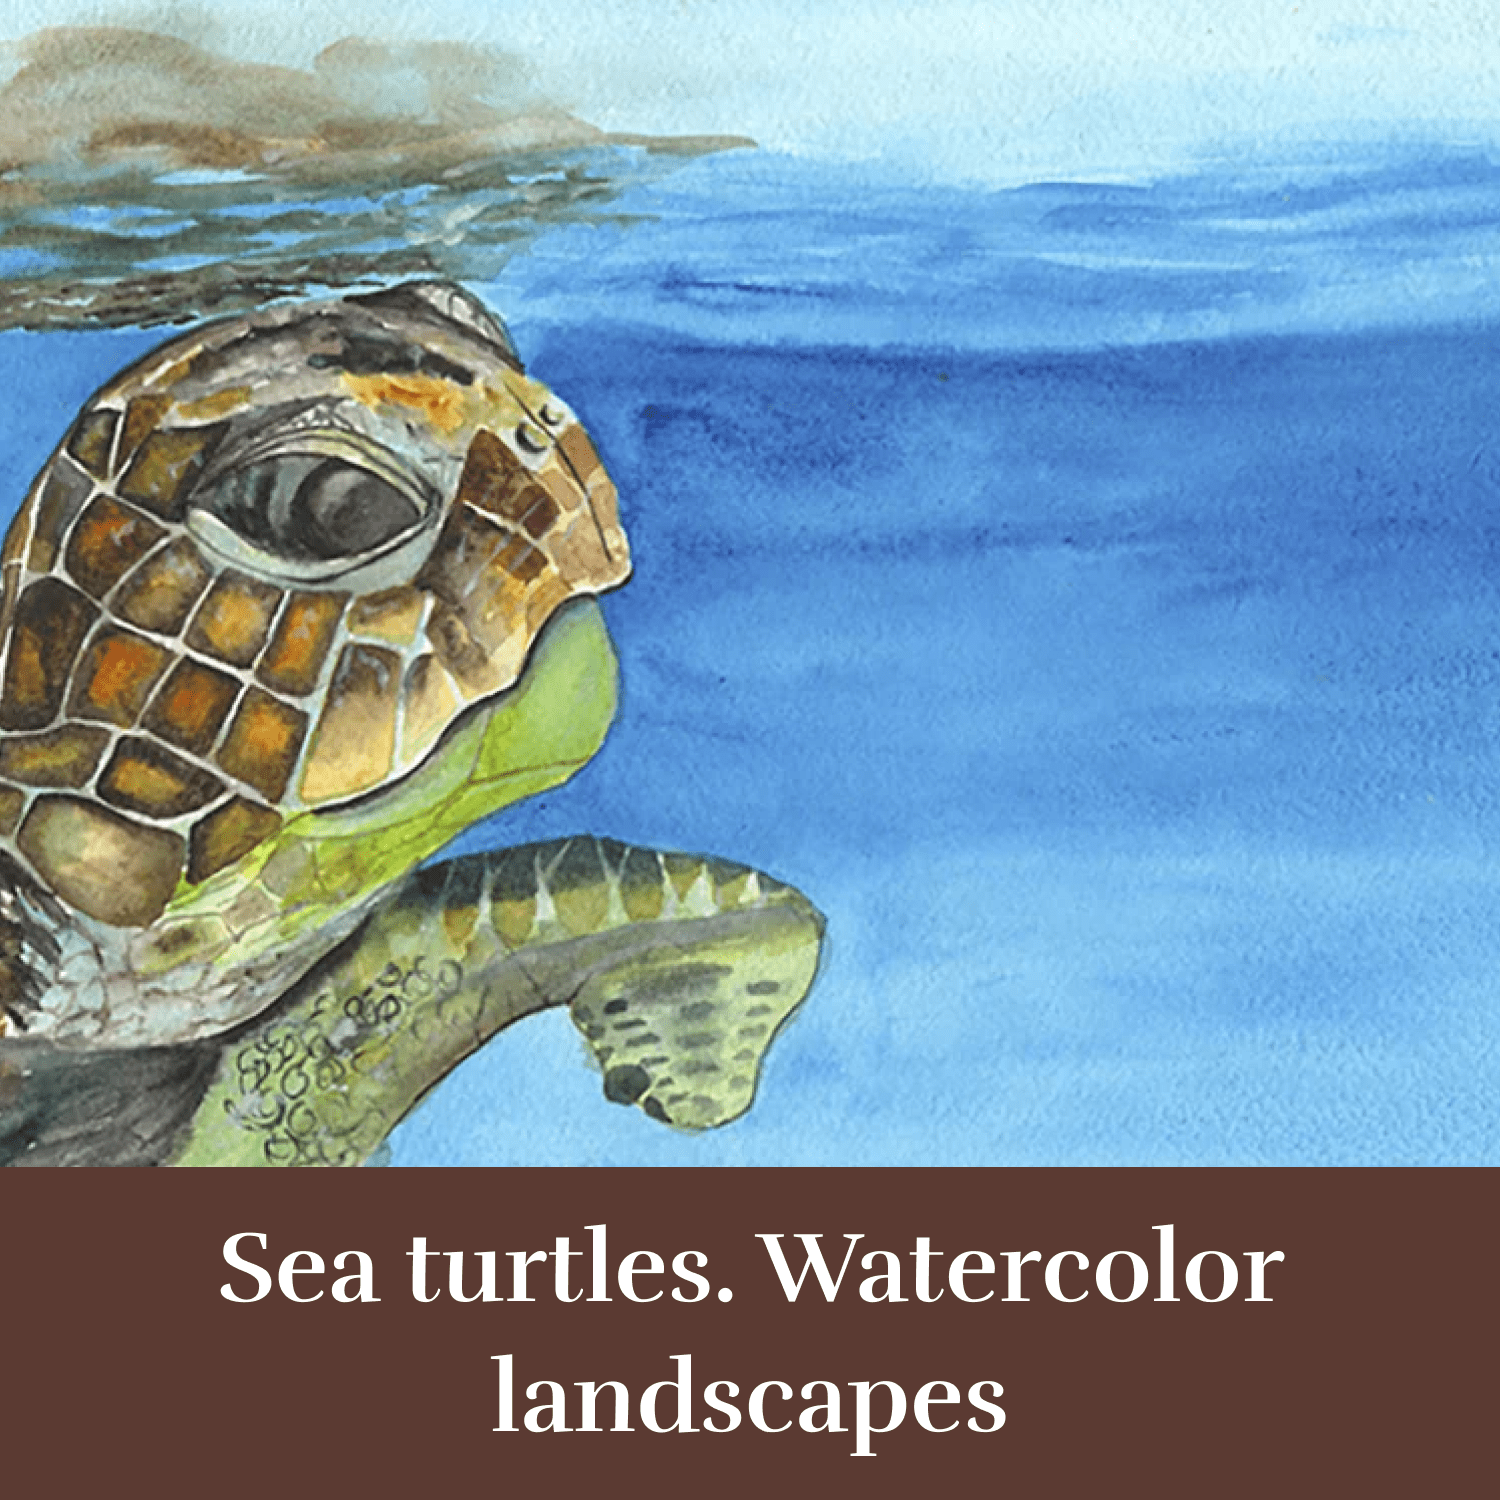 Save Sea turtles. Watercolor landscapes. cover.